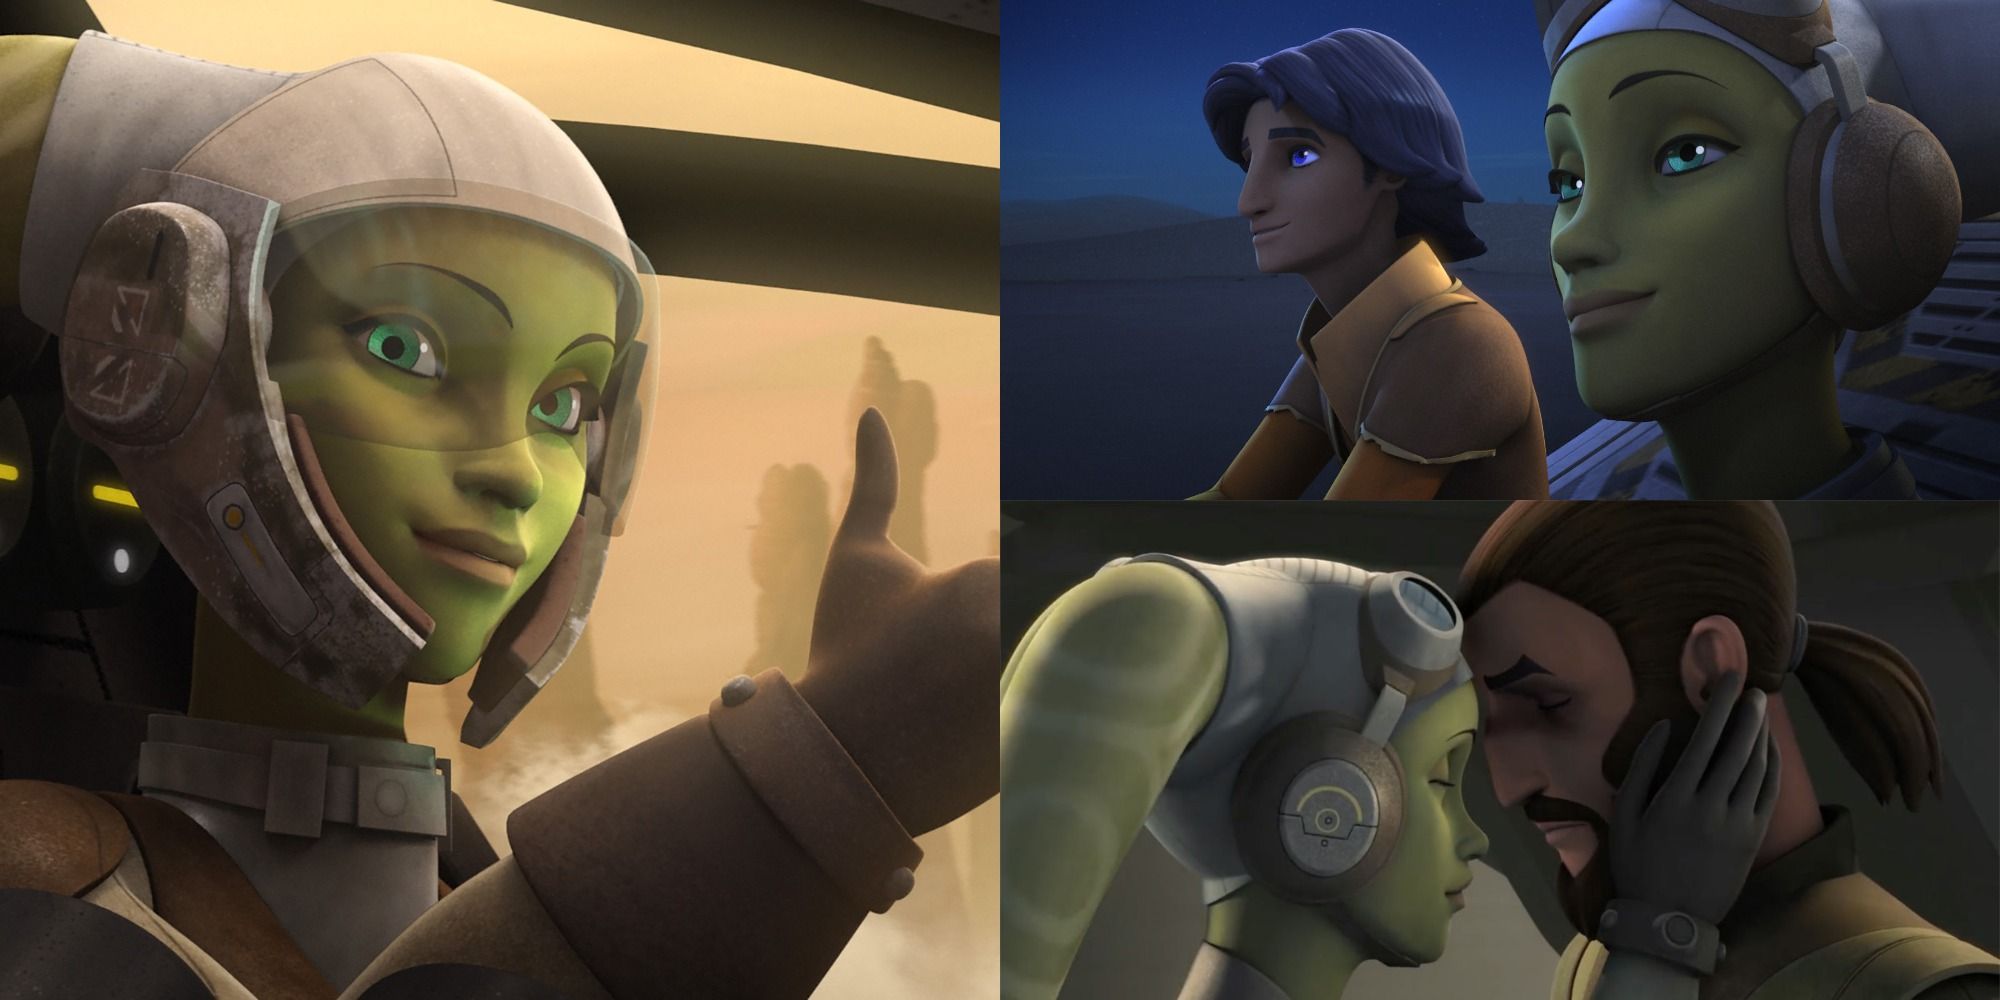 Two side by side images from Star Wars Rebels with Hera Syndulla.